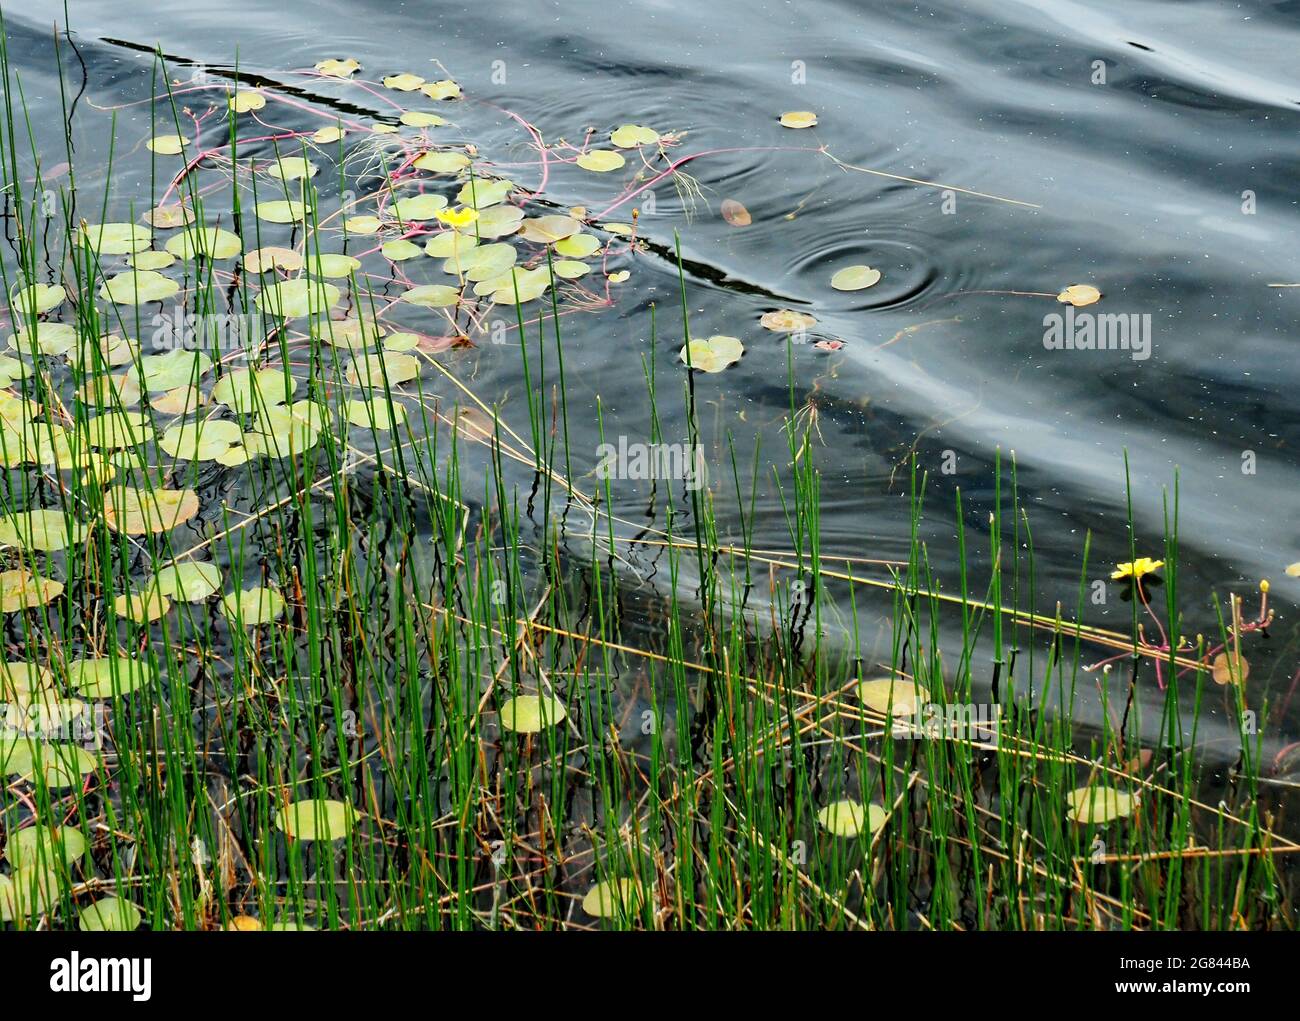 Reflections and ripples and reeds in a mountain pool, Snowy Mountains NSW Australia Stock Photo